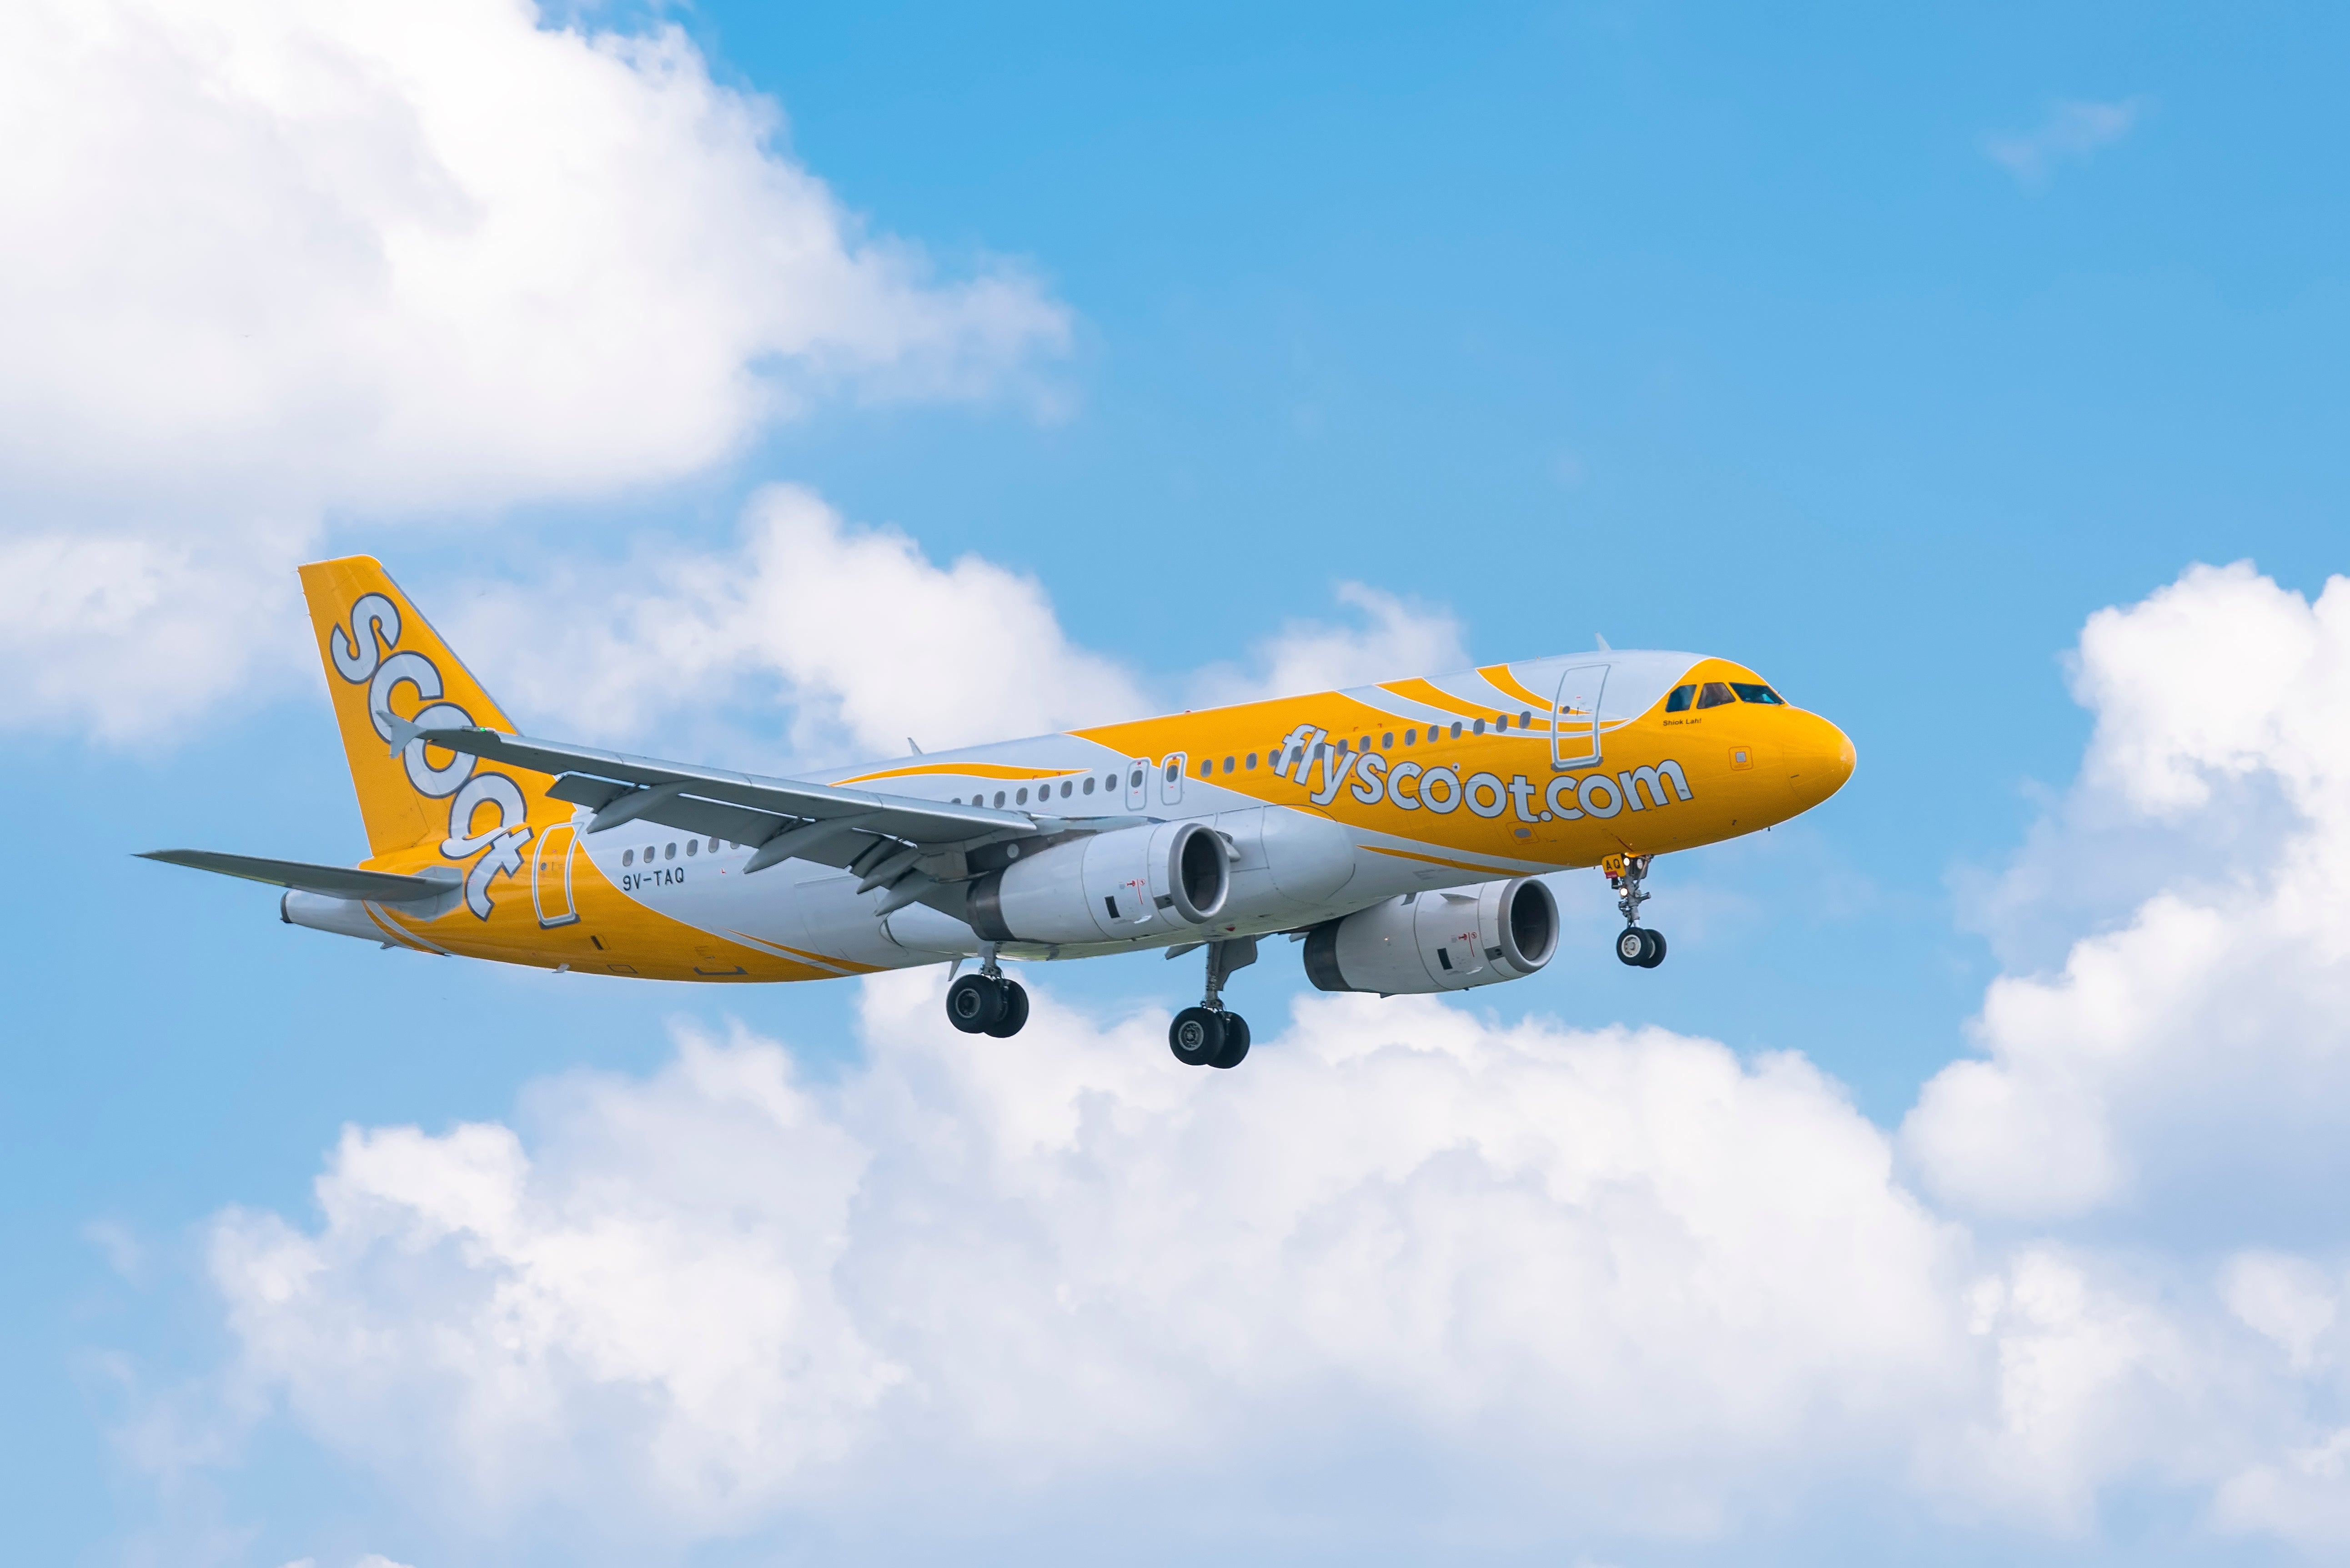 The low-cost airline said the schedule change was due to ‘inclement weather conditions’